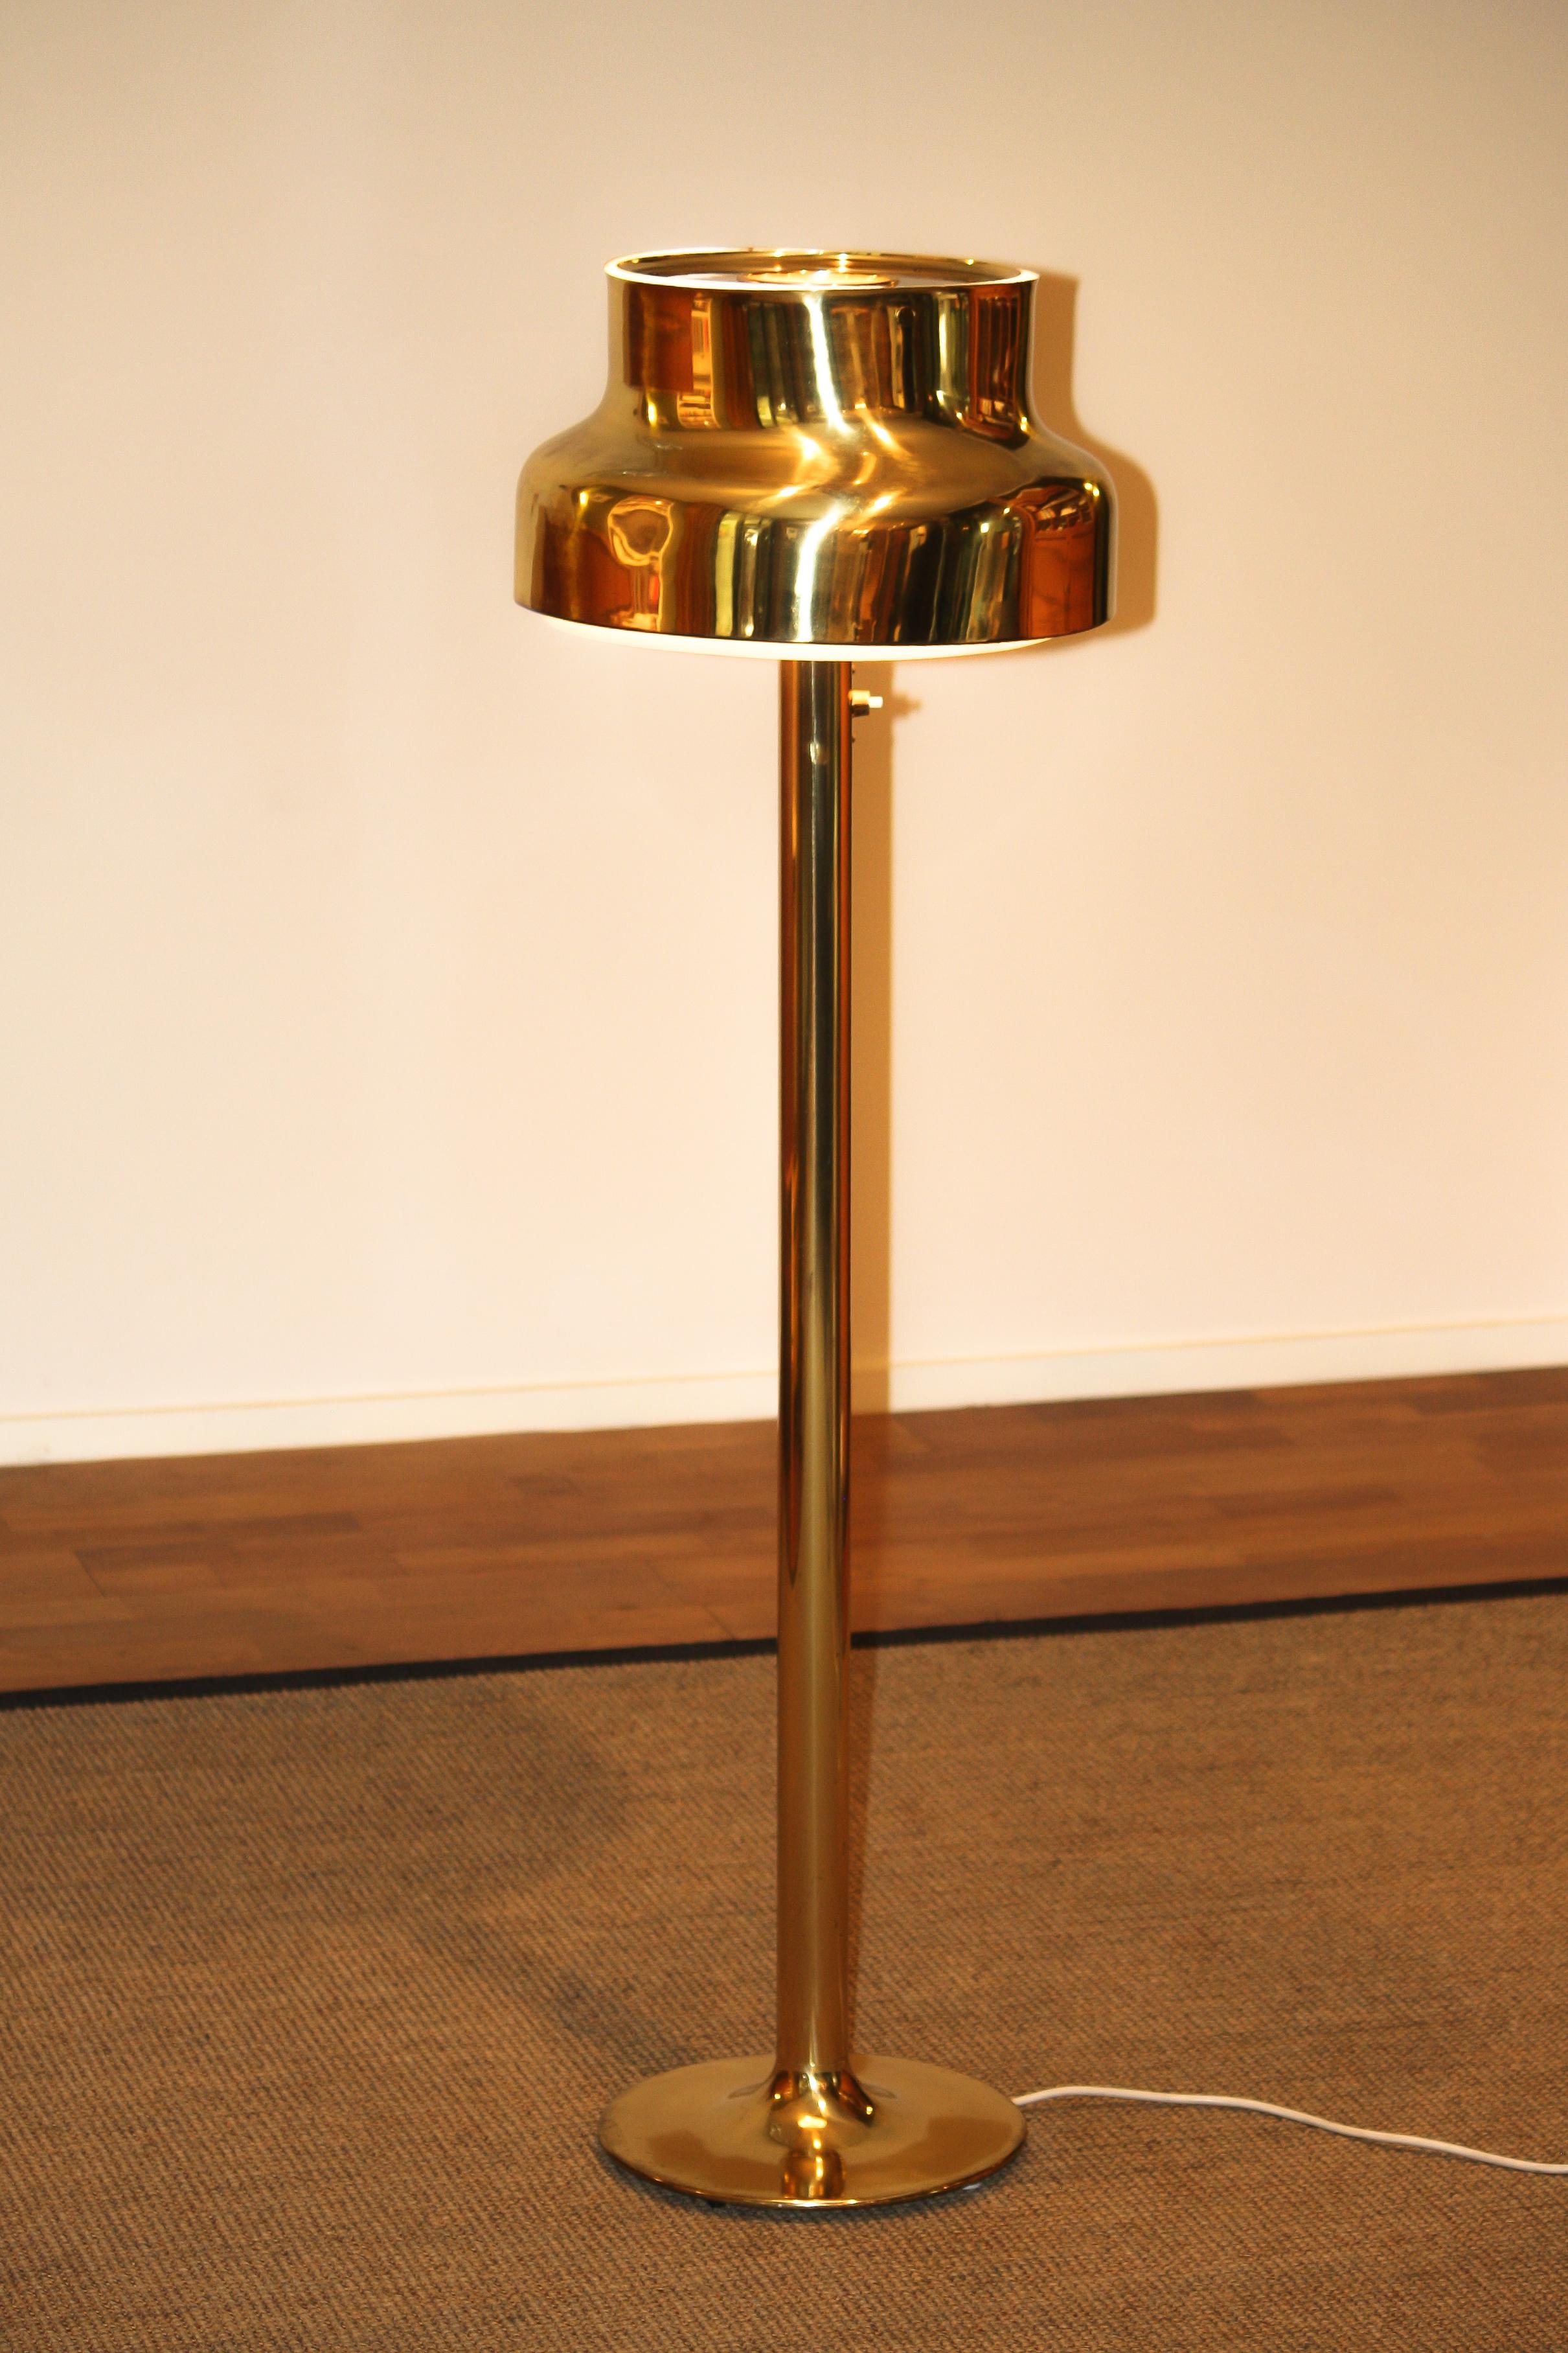 1960s Golden or Brass Floor Lamp by Anders Pehrson ‘Bumling’ for Ateljé Lyktan (Mitte des 20. Jahrhunderts)